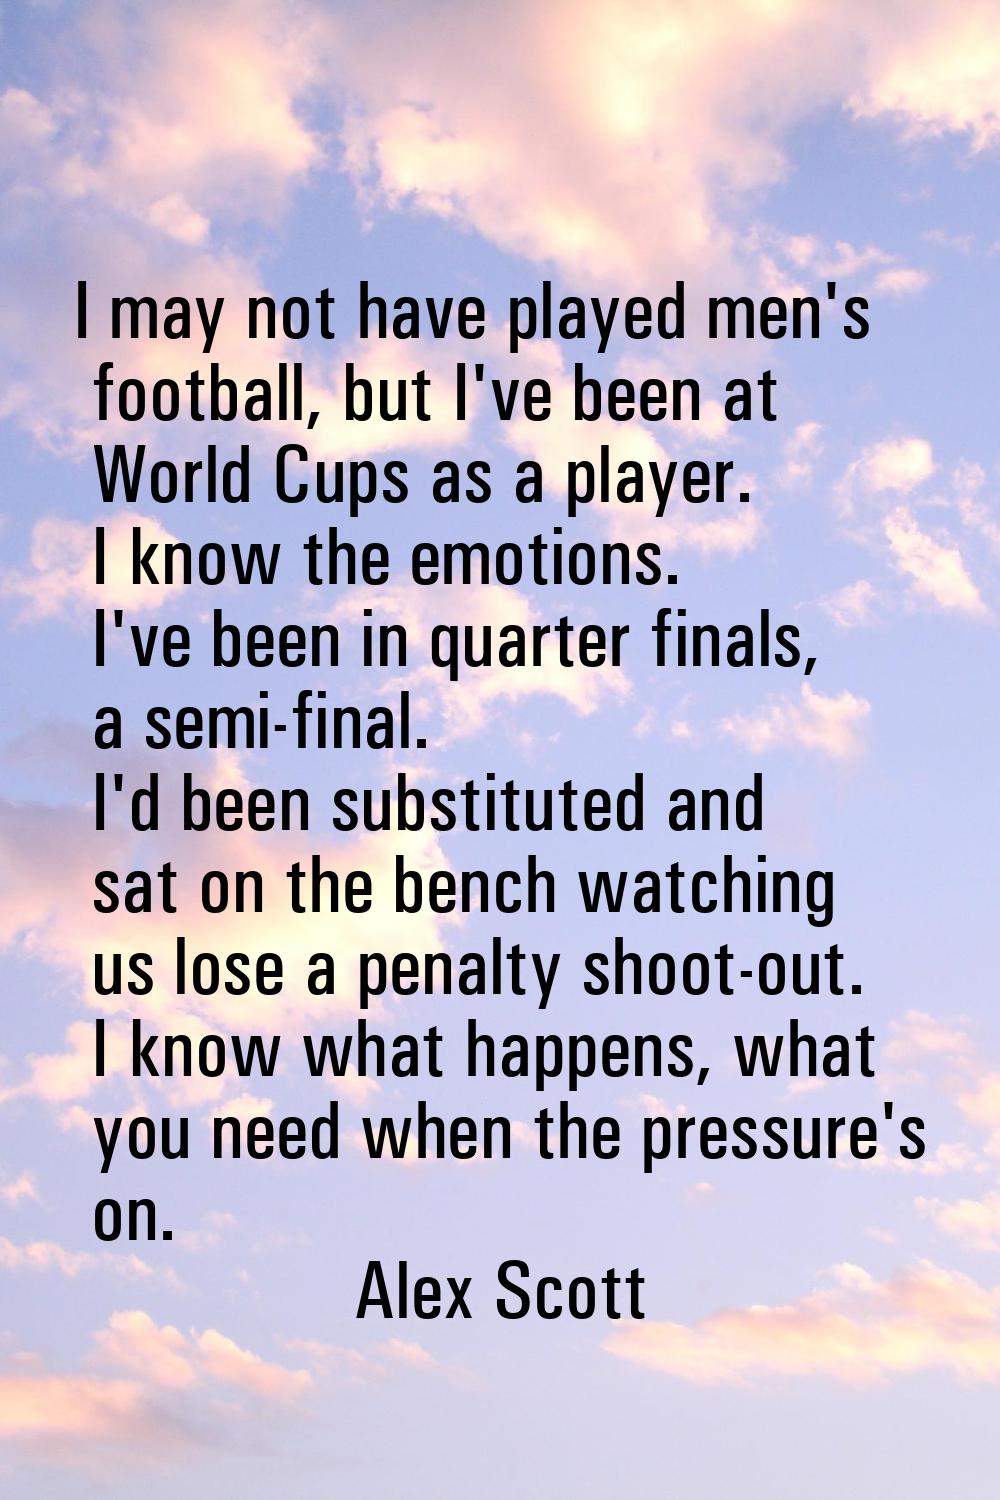 I may not have played men's football, but I've been at World Cups as a player. I know the emotions.